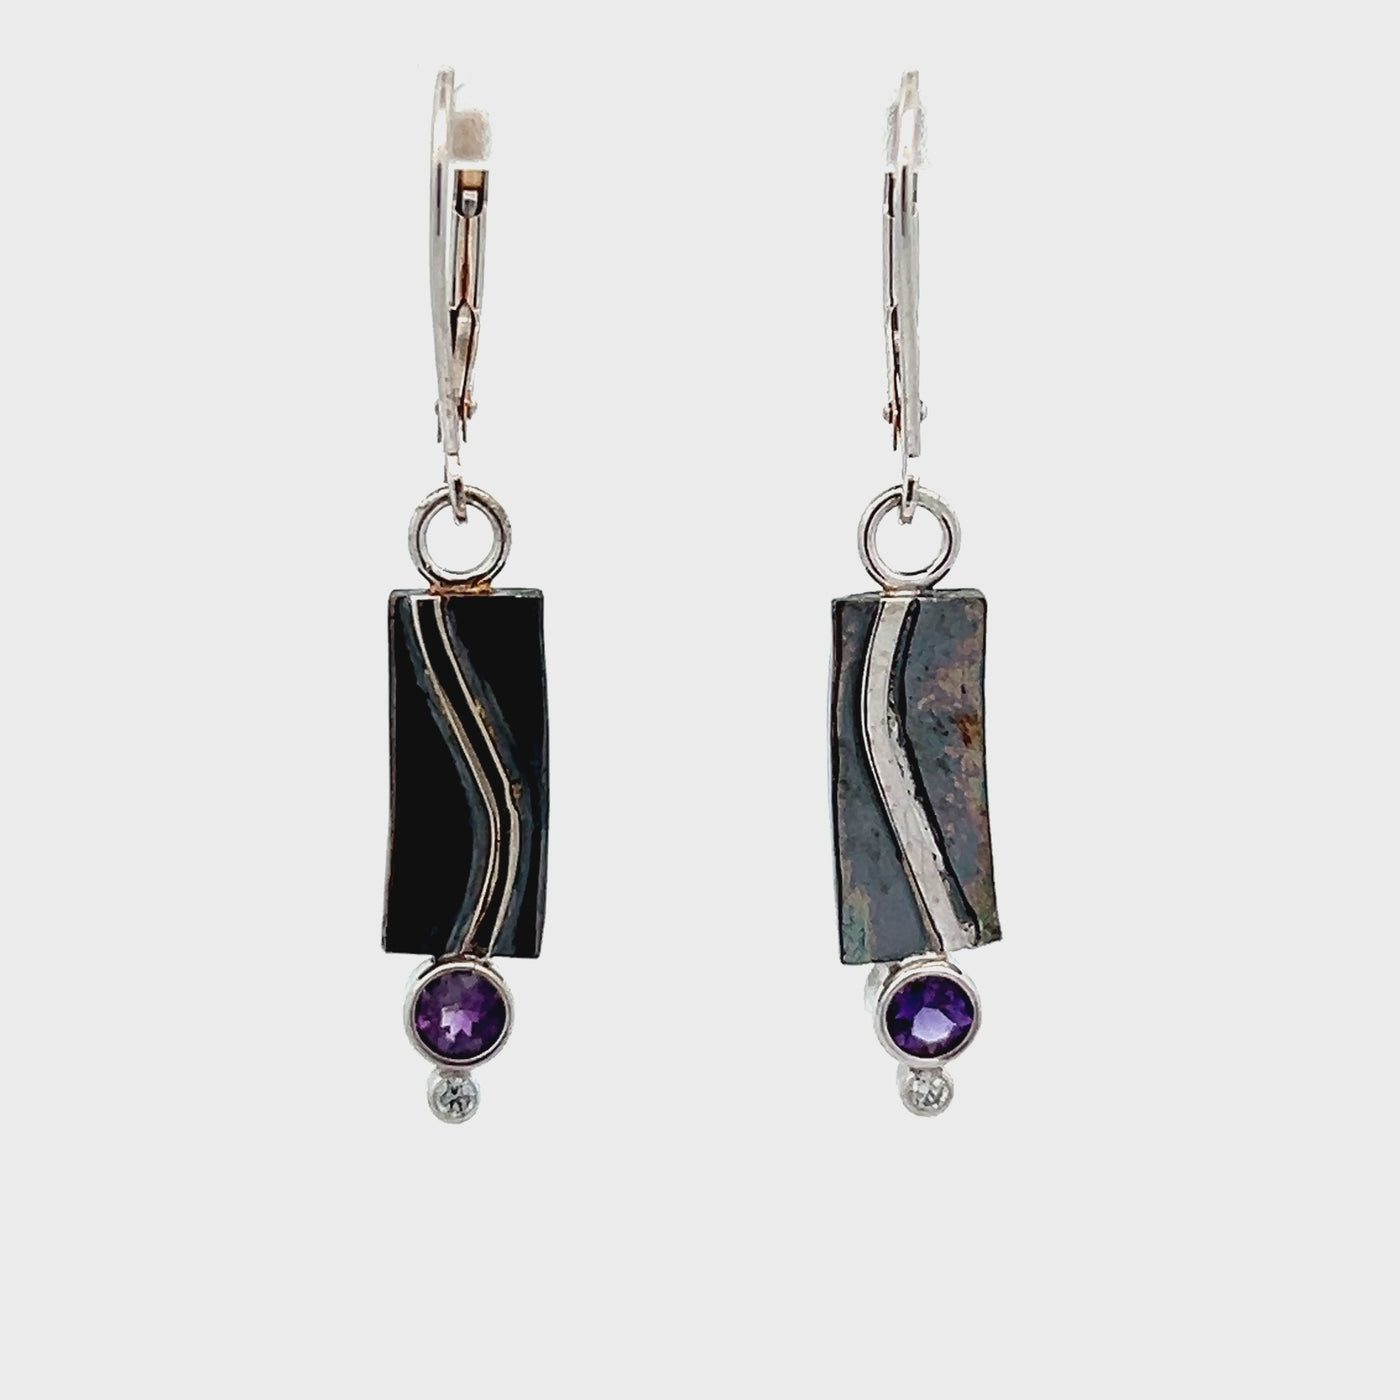 Oxidized Sterling Silver and 14k White Gold Amethyst and Diamond Pathways Earrings by Paul Richter (0.40ctw.)